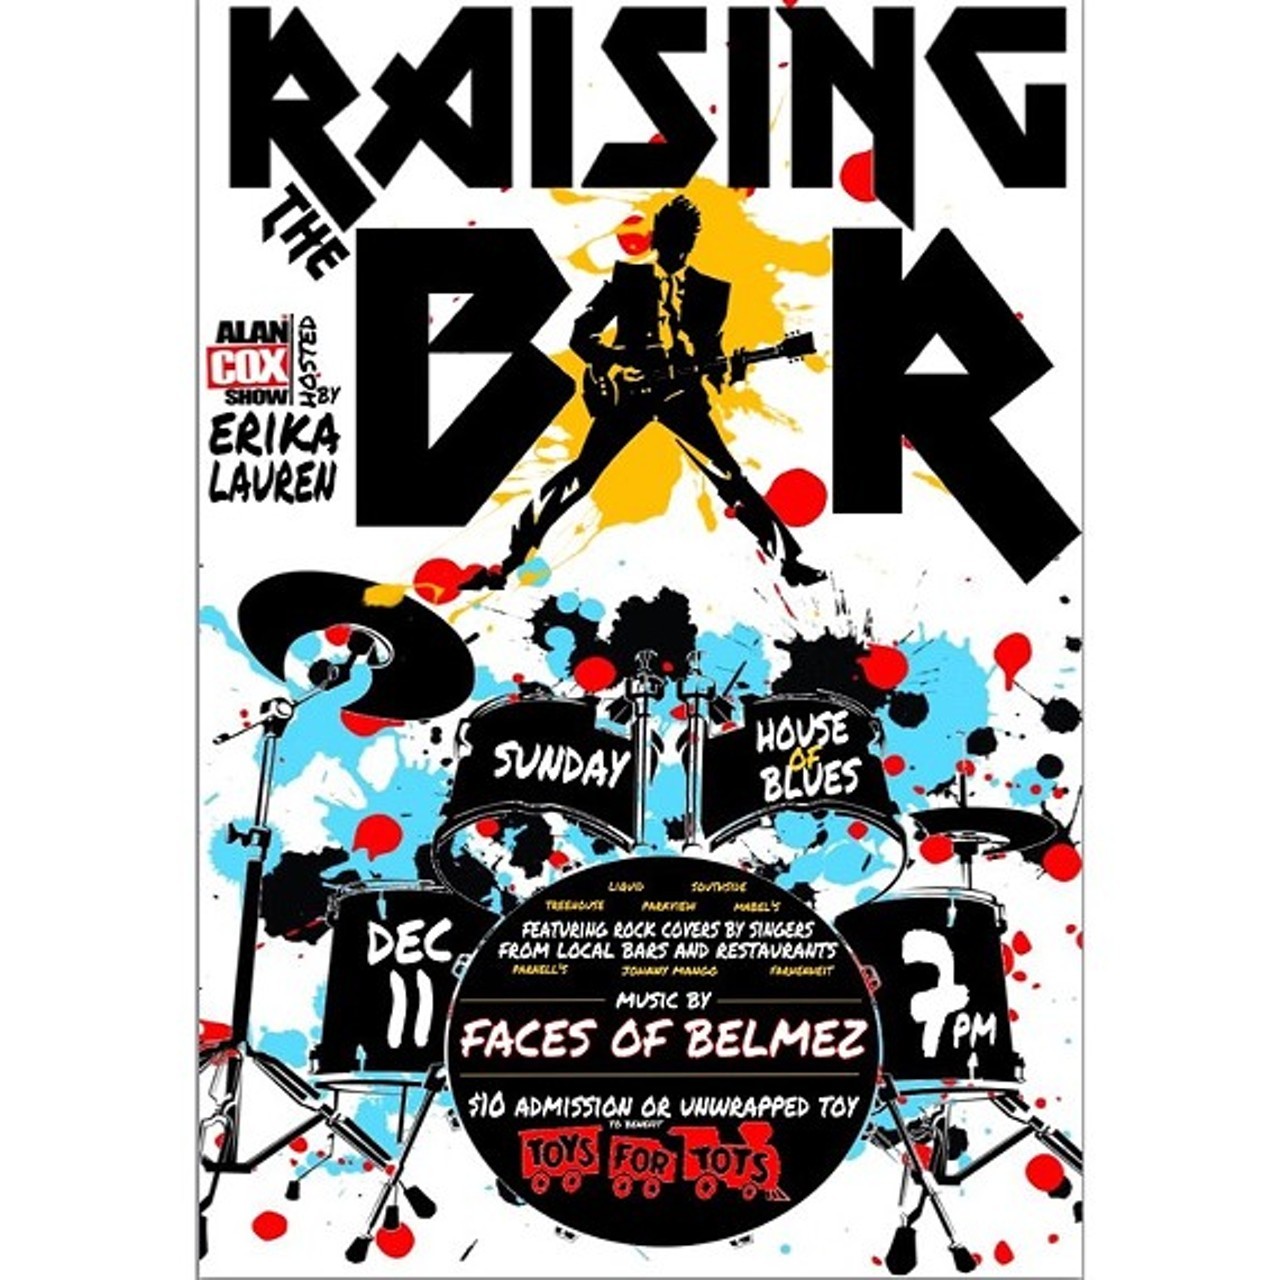 Raising the Bar 
When: Sun., Dec. 11, 7-10 p.m. 
Price: An unwrapped toy, or $10 
https://www.facebook.com/RaisingTheBarCLE
Come join your favorite Cleveland area bartenders at the House of Blues Cambridge Room as they take turns taking over as lead singer for local band Faces of Belmez! All proceeds from door and raffle will go to benefit local chapter of Toys for Tots. (Photo courtesy Raising the Bar)